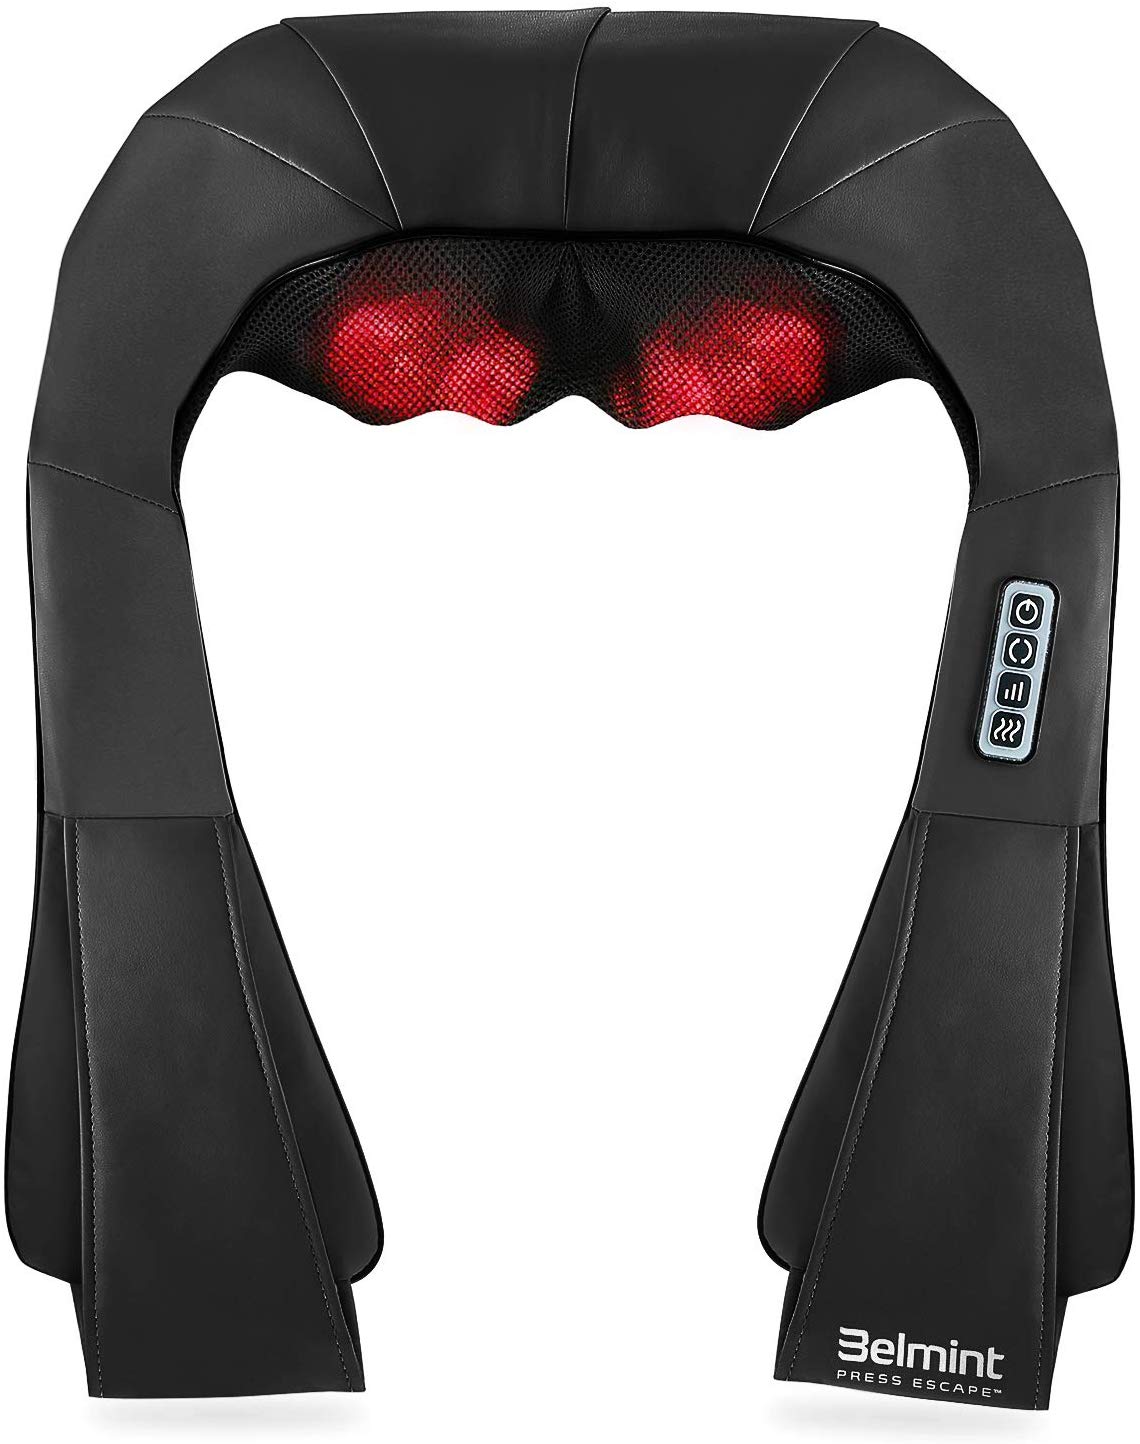 Deep Kneading Neck Massager with Heat - Electric Shiatsu Neck Back and Shoulder Massager for Home Car or Office Use (Black)